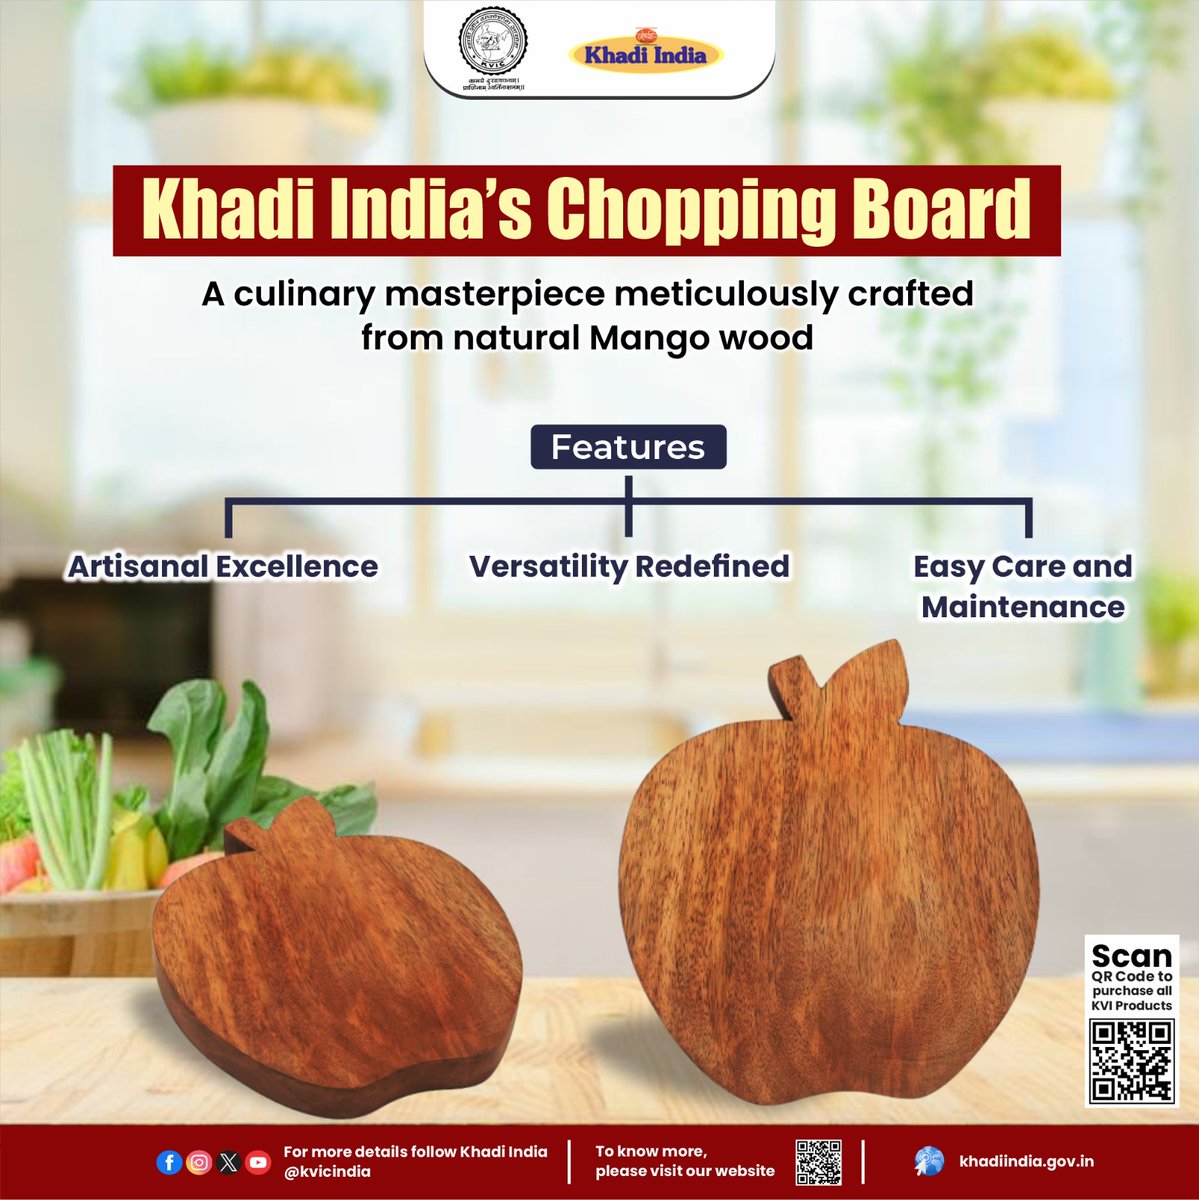 A culinary masterpiece meticulously crafted from natural Mango wood. This versatile piece is not just a chopping solution but a dynamic addition to your kitchen. Visit your nearest #Khadi store or purchase all #KVIProducts online at khadiindia.gov.in #KVIC #KhadiIndia